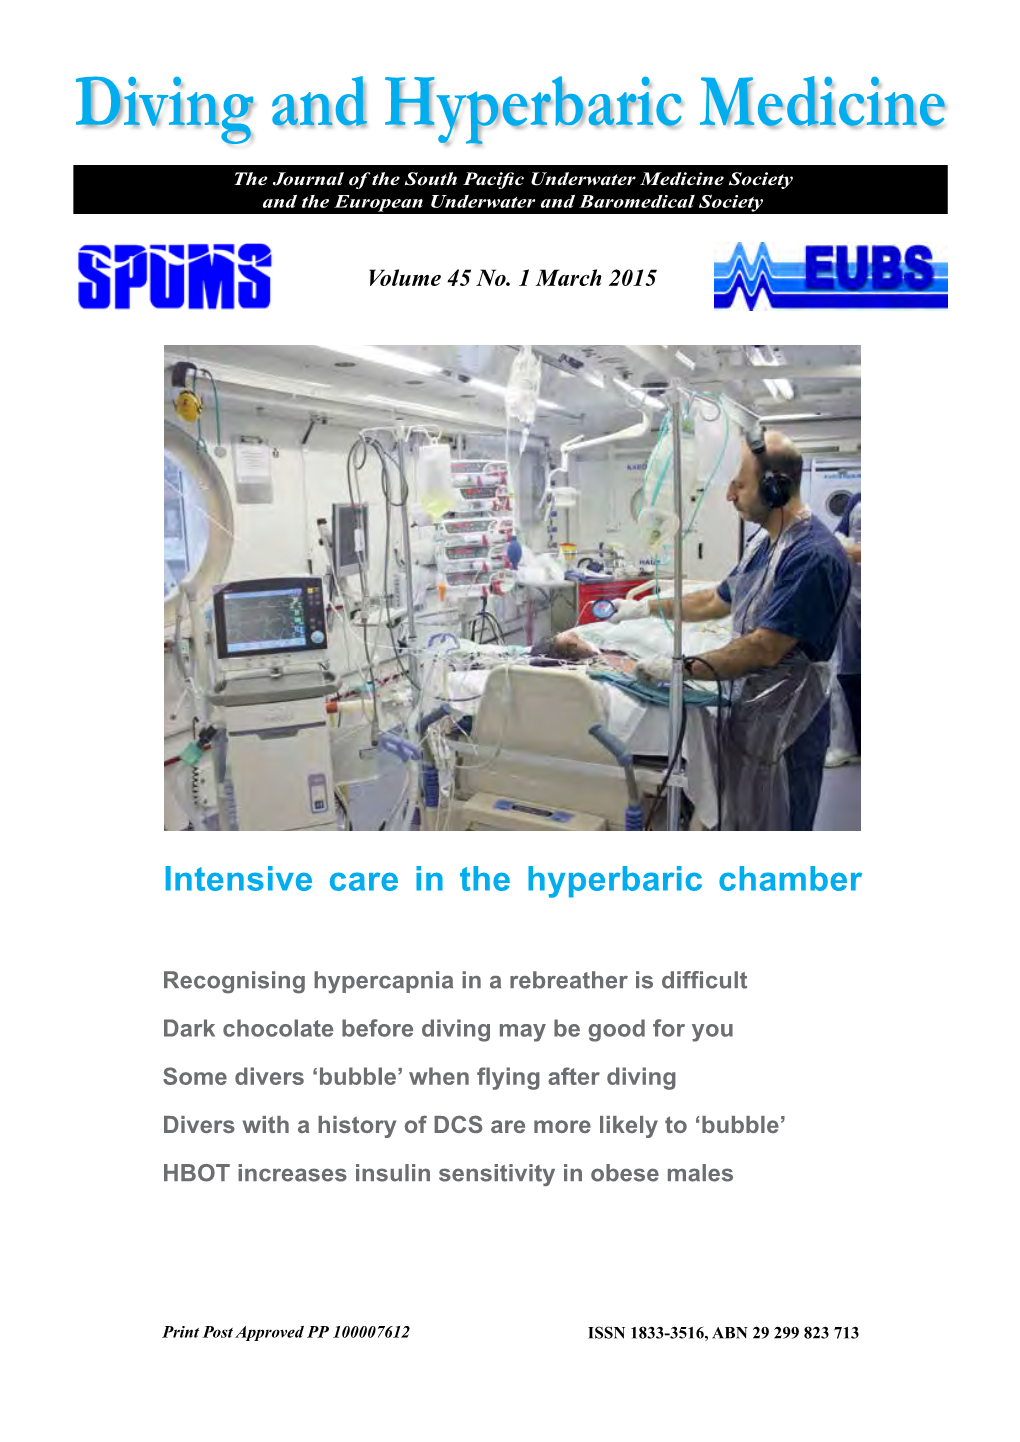 Intensive Care in the Hyperbaric Chamber